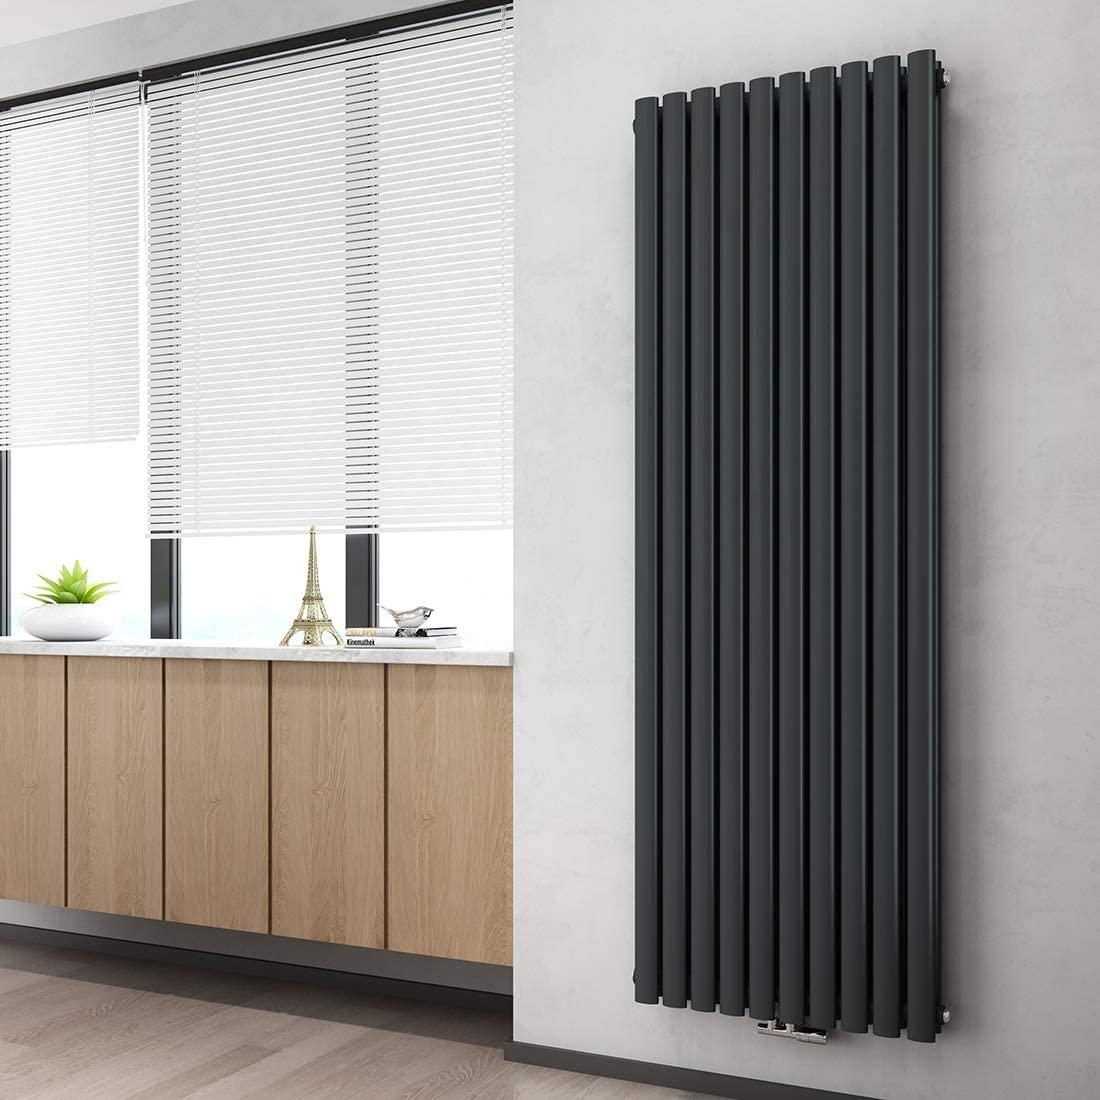 Double Oval Vertical Heating Radiator